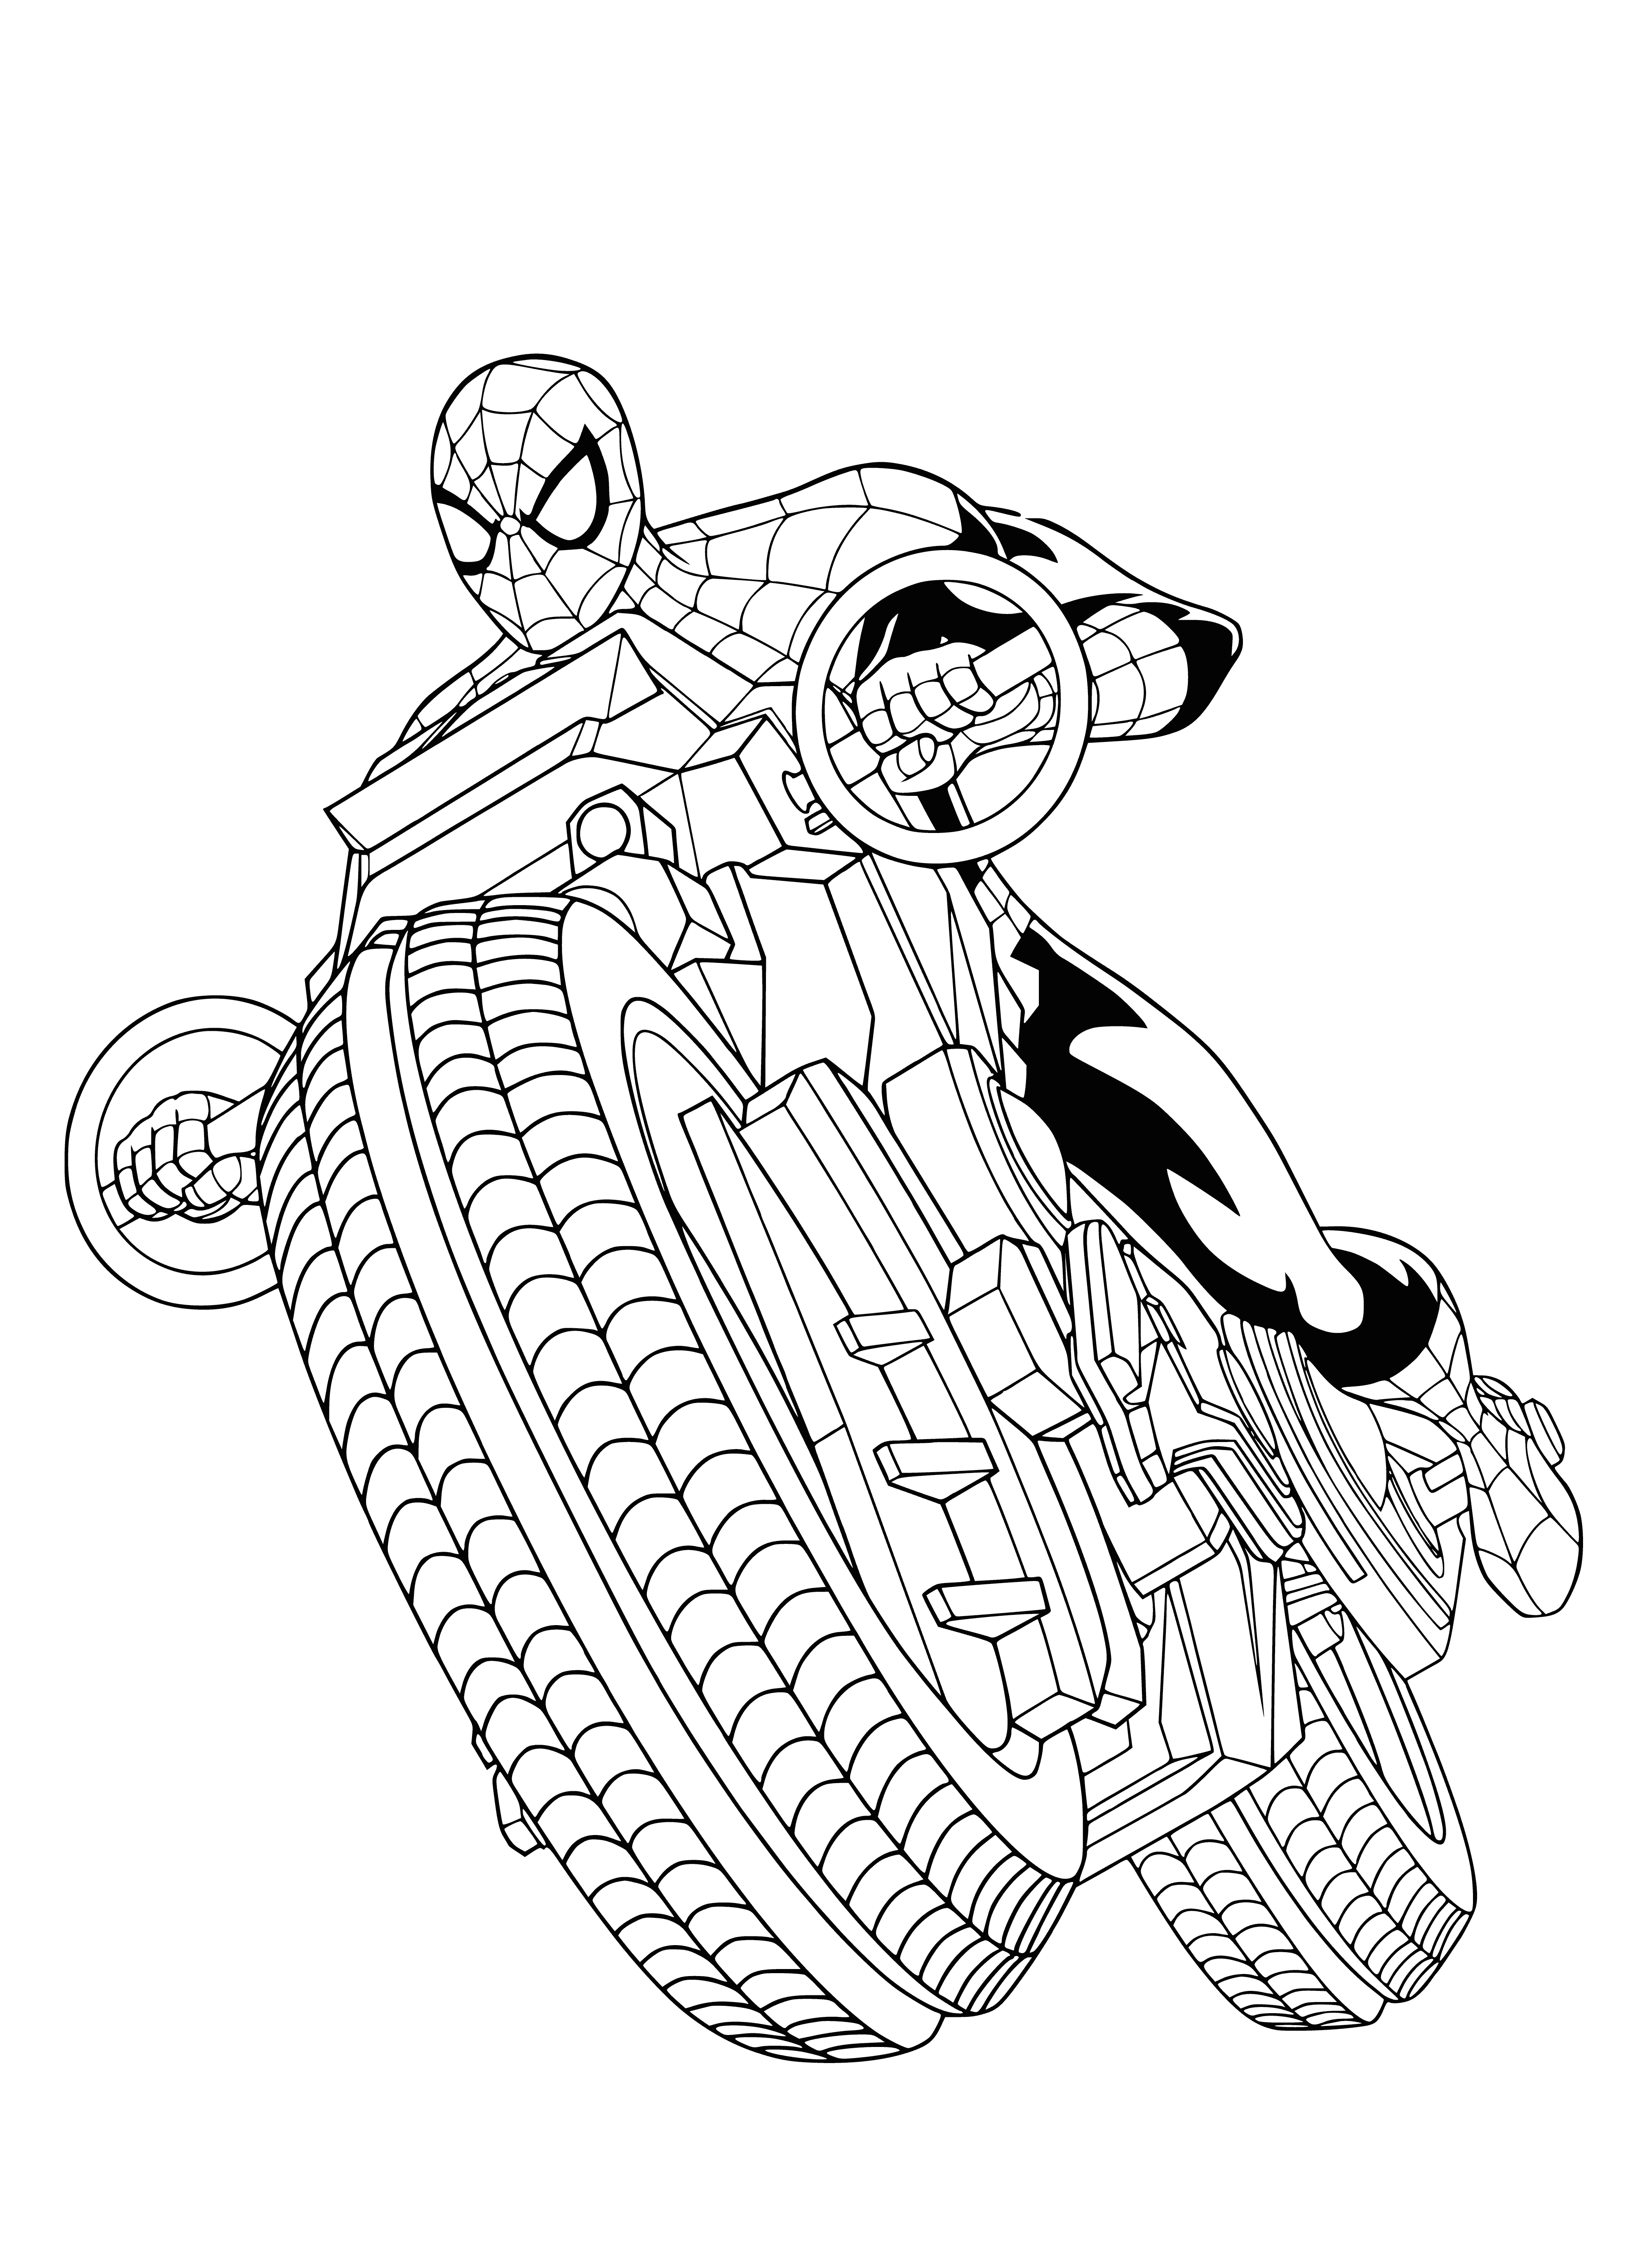 Spiderman on a motorcycle coloring page